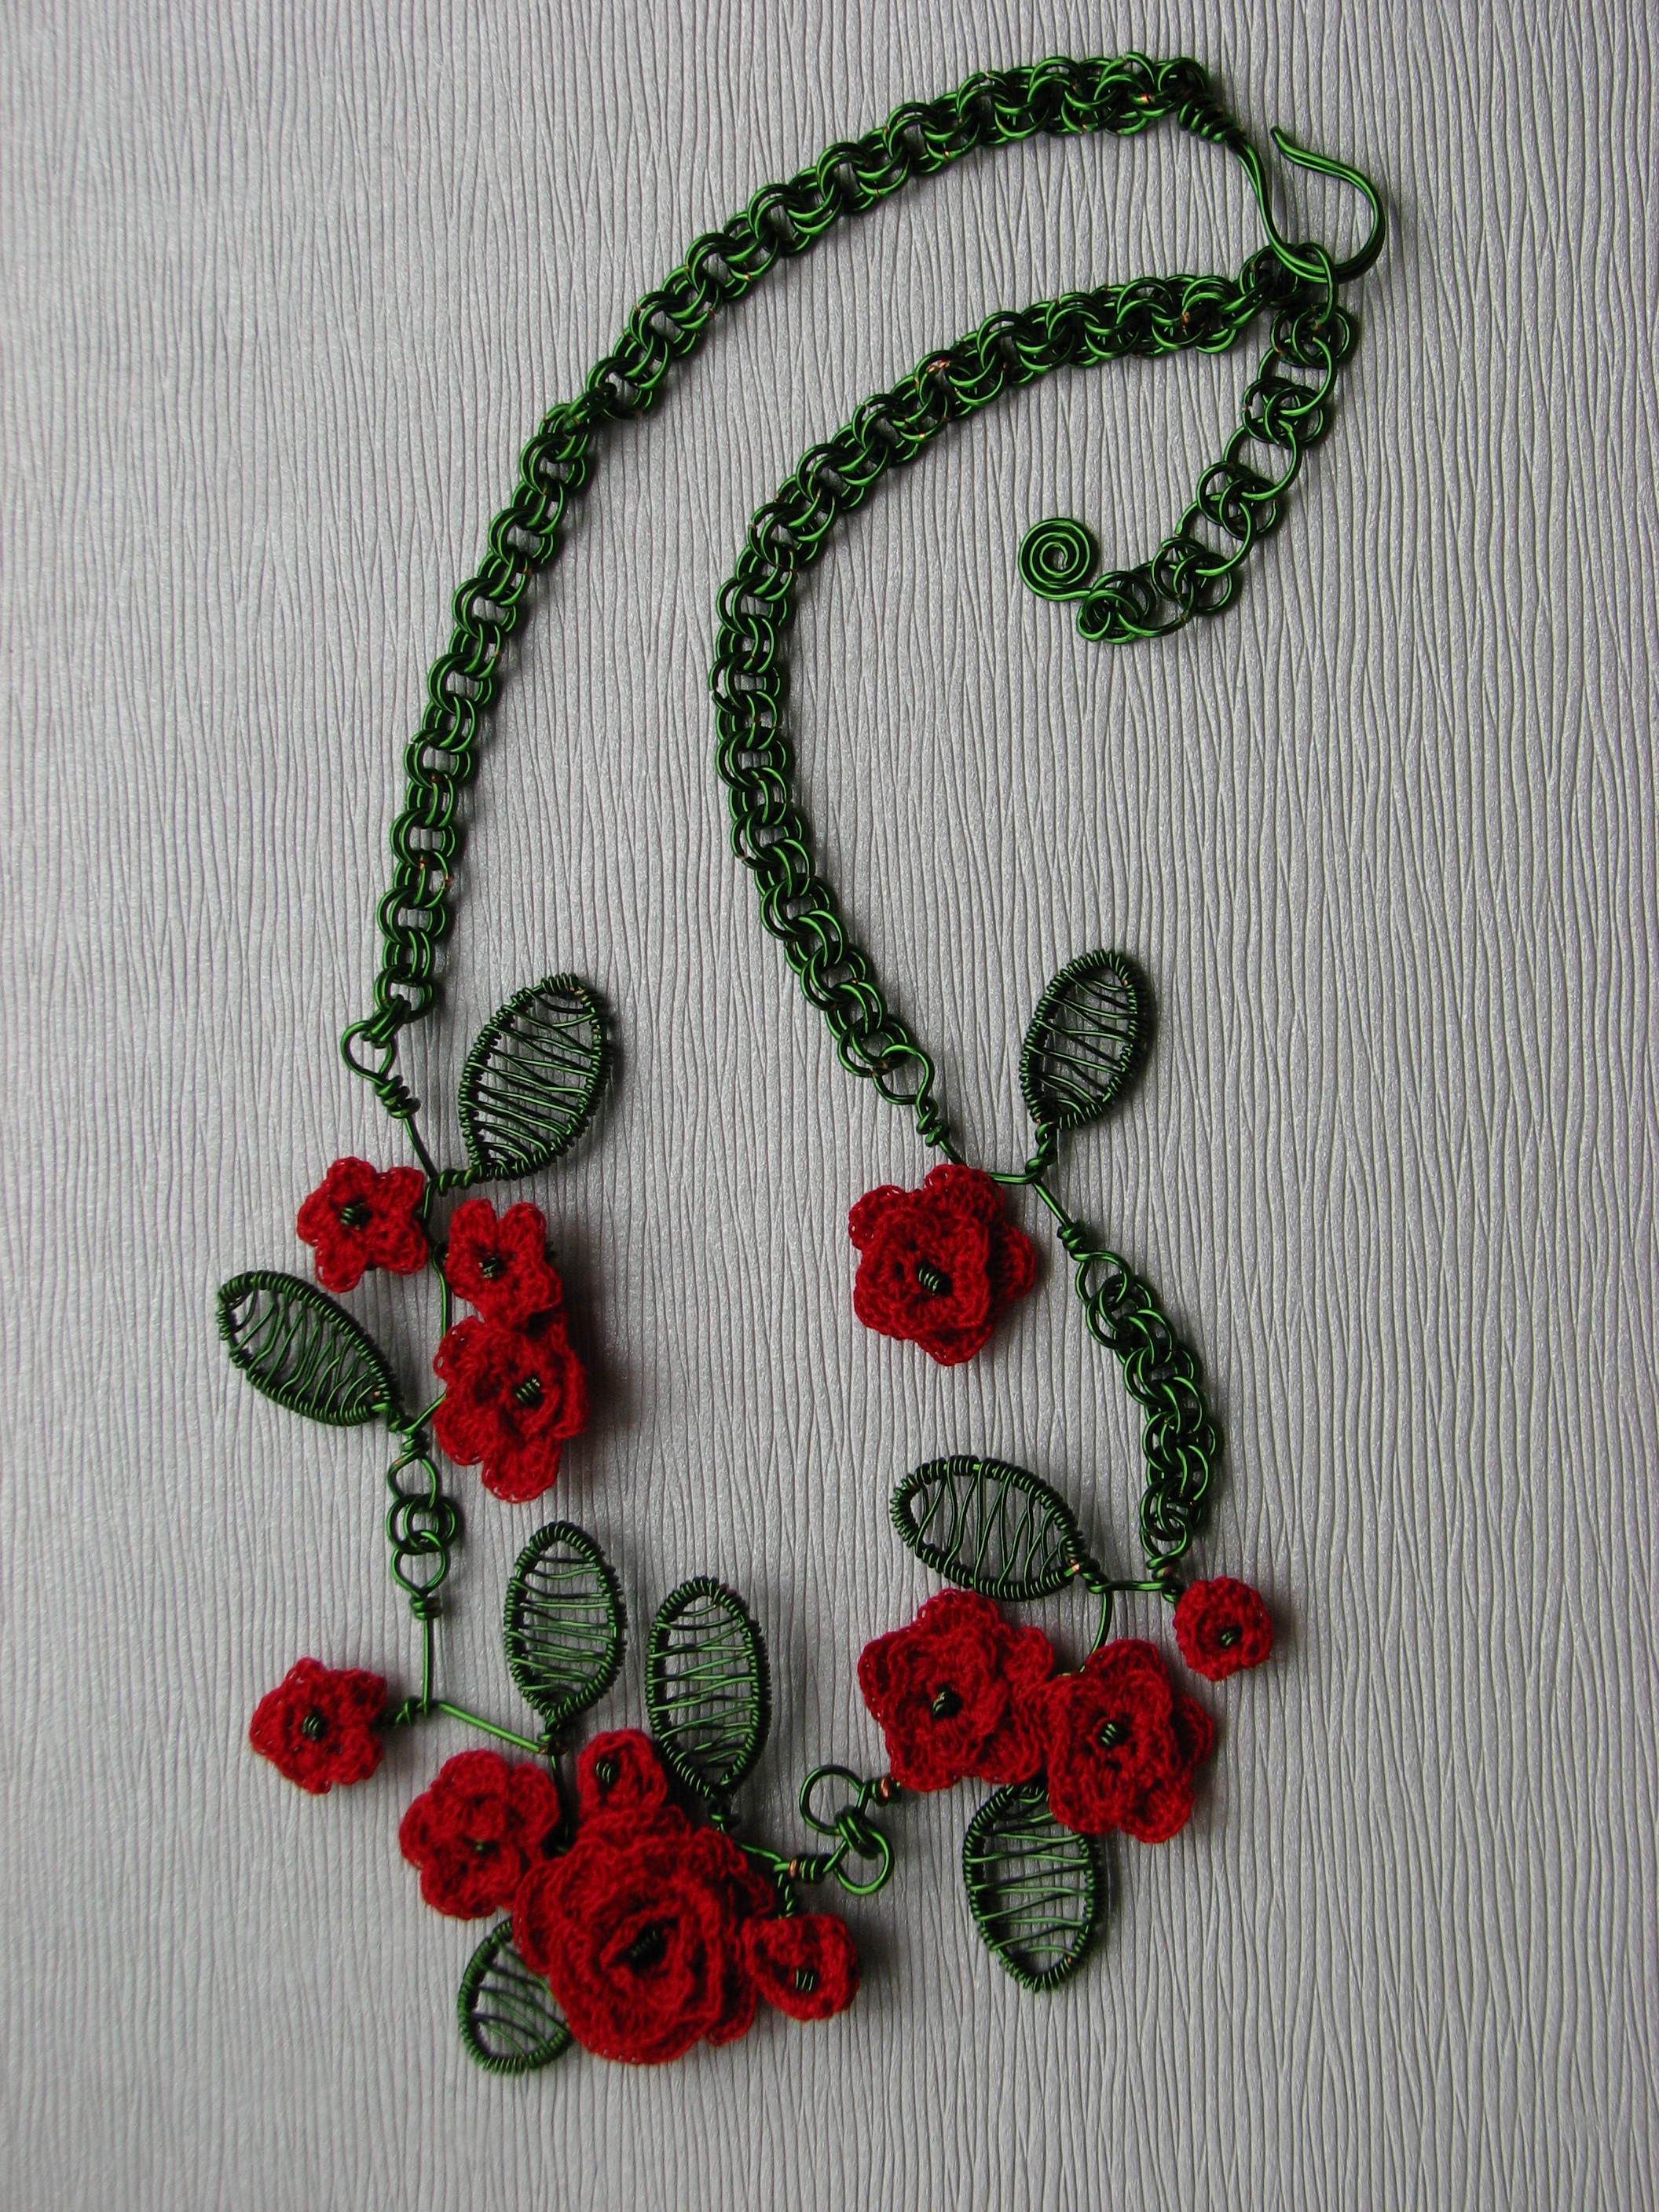 Crochet Rose and Wire necklace